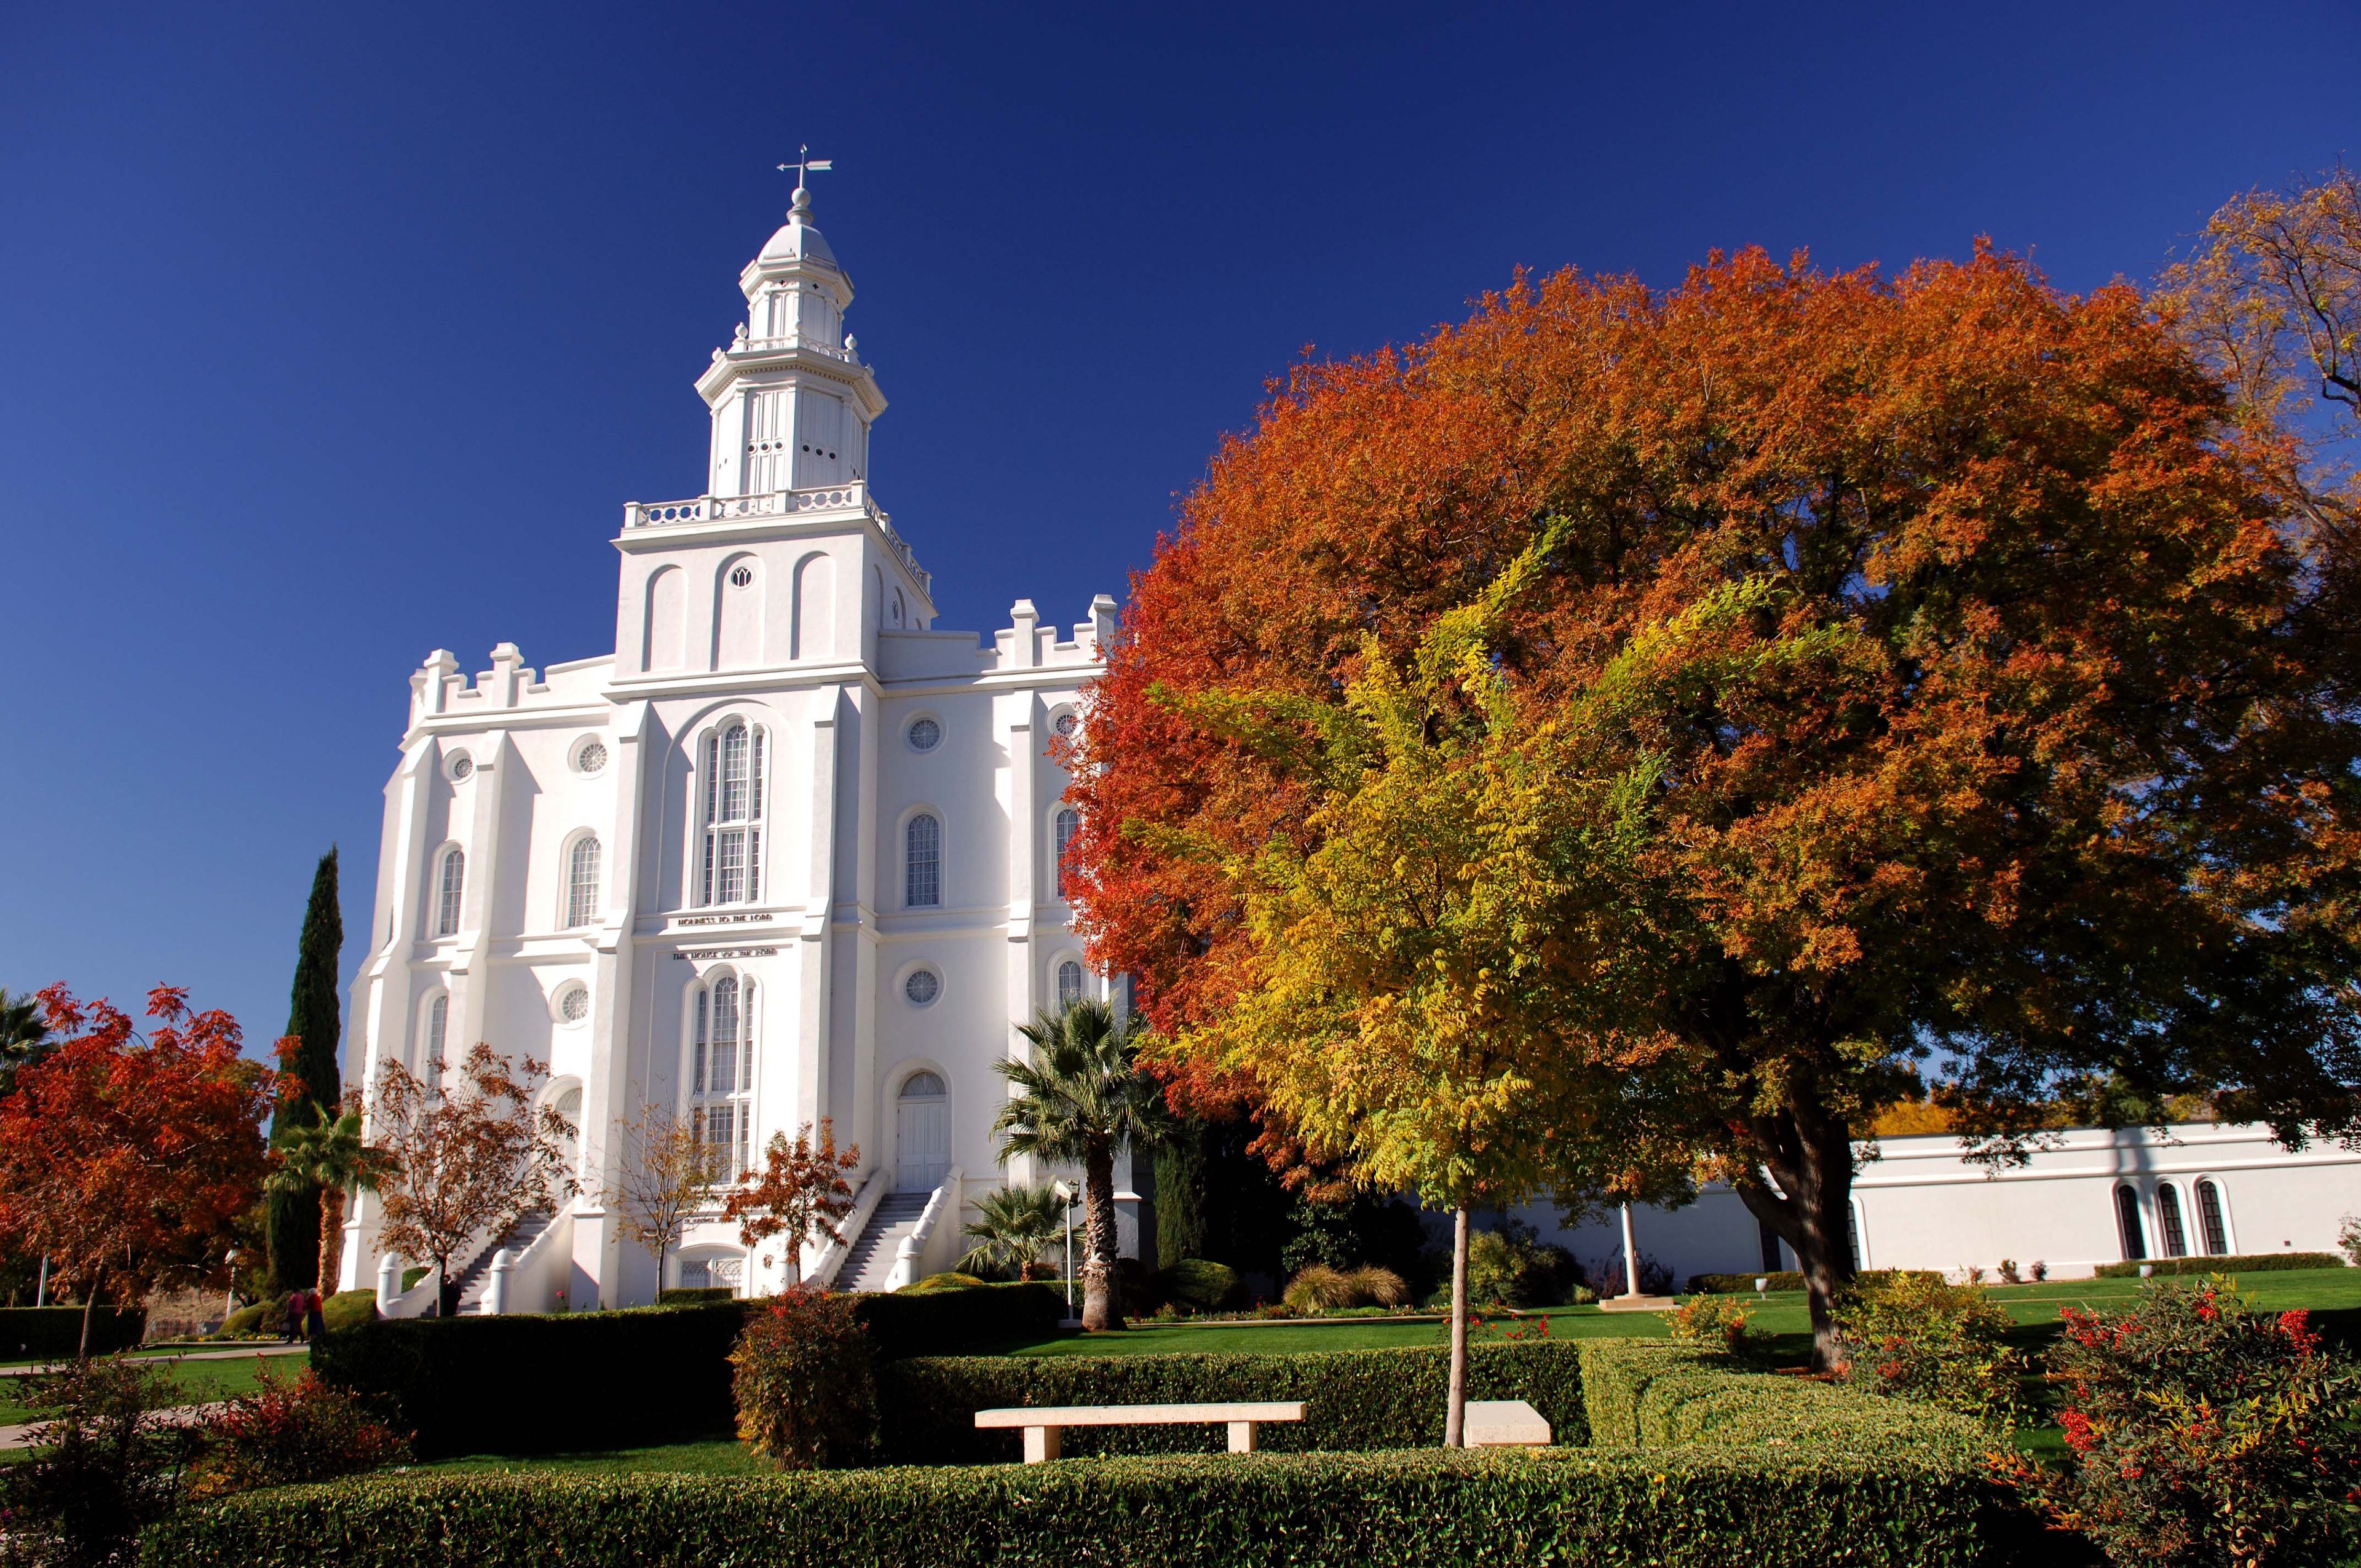 The St. George Utah Temple in the fall, including the entrance and scenery.